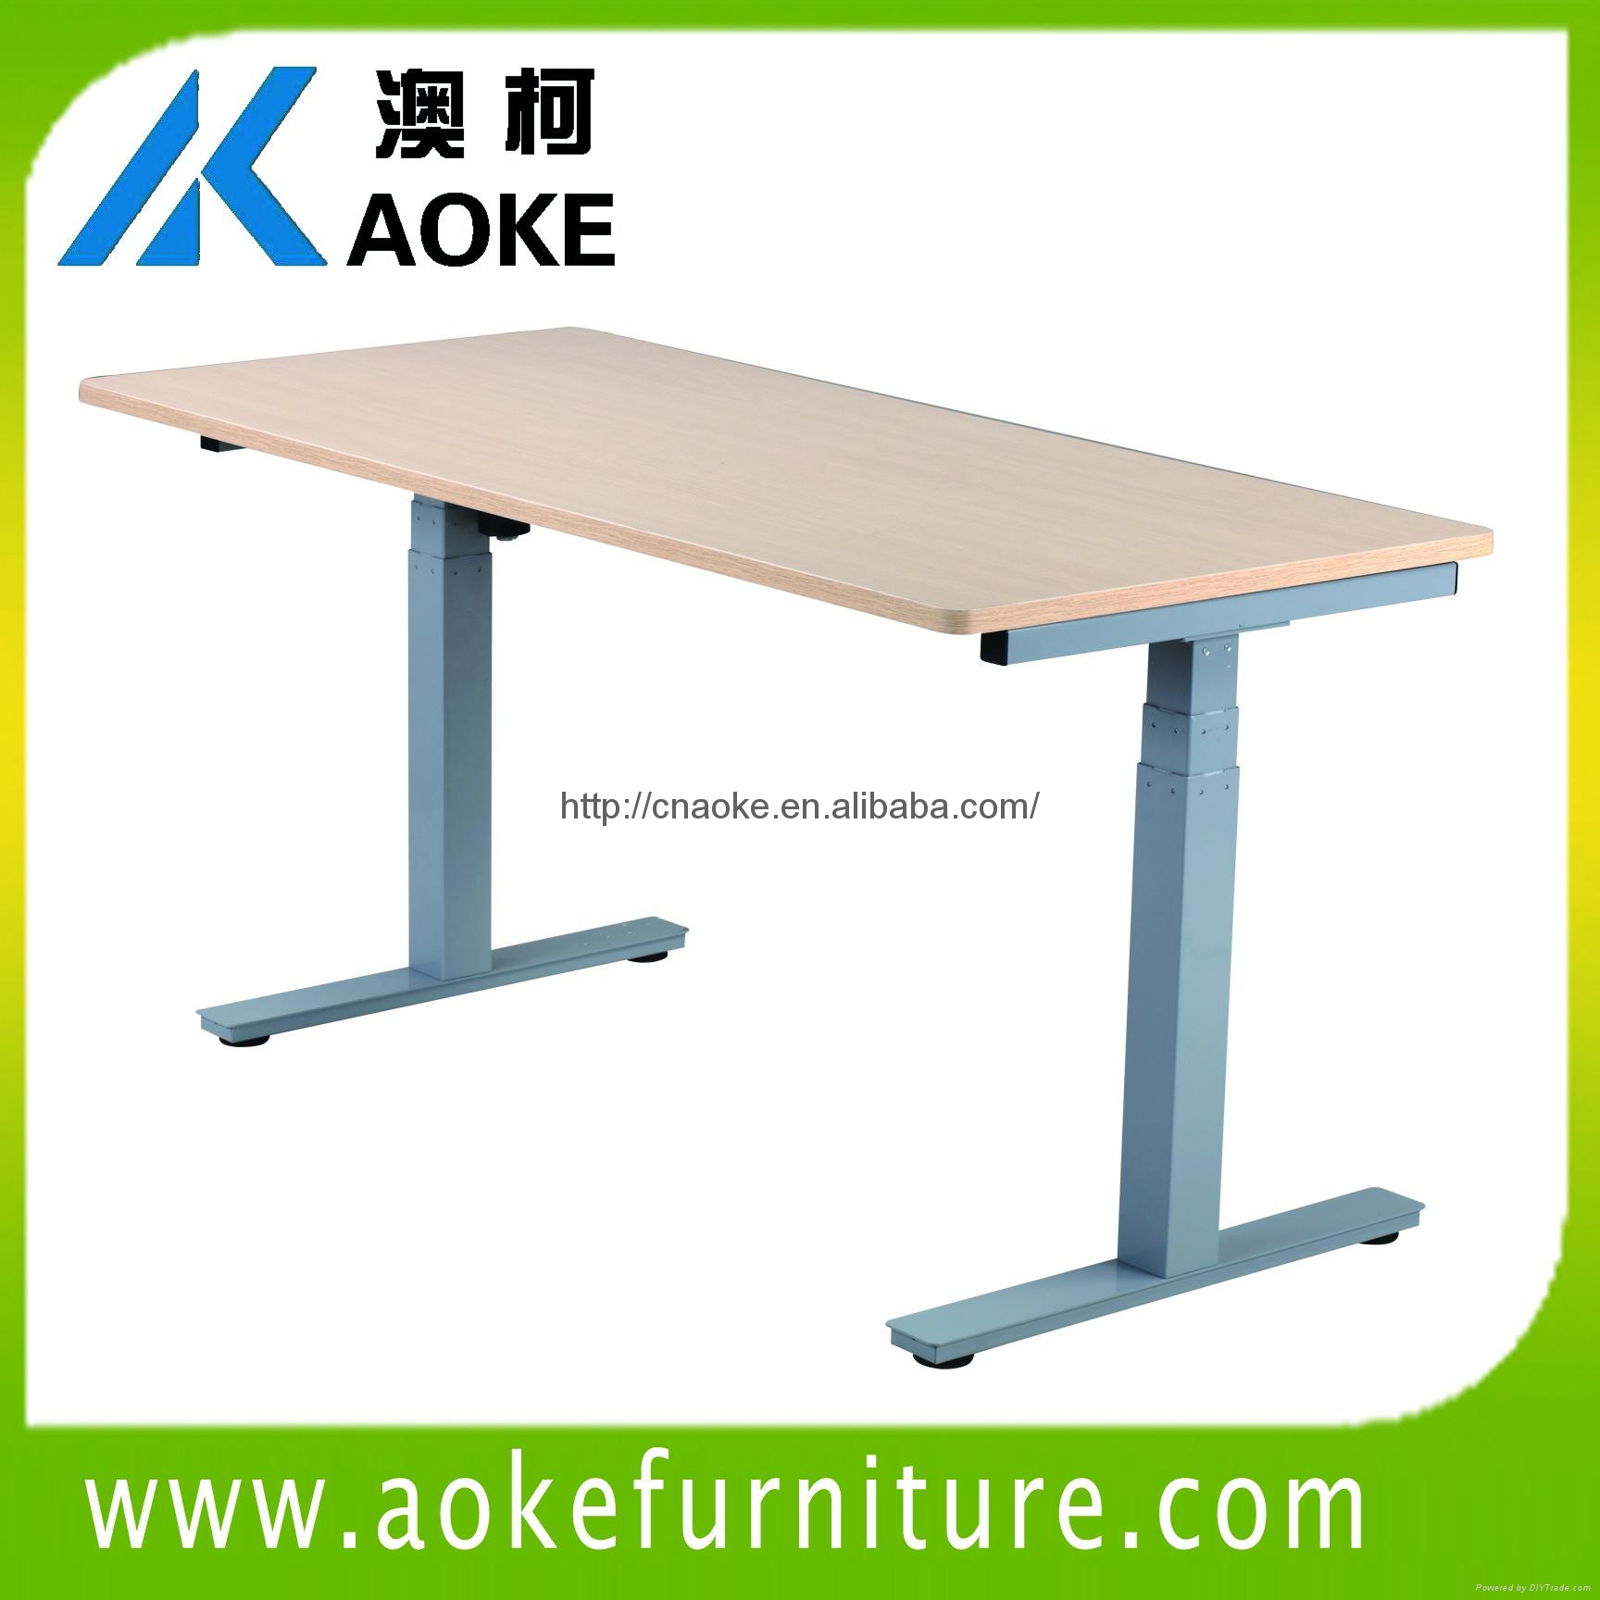 AOKE AK02ES-A-F motorized up and down standing table 5